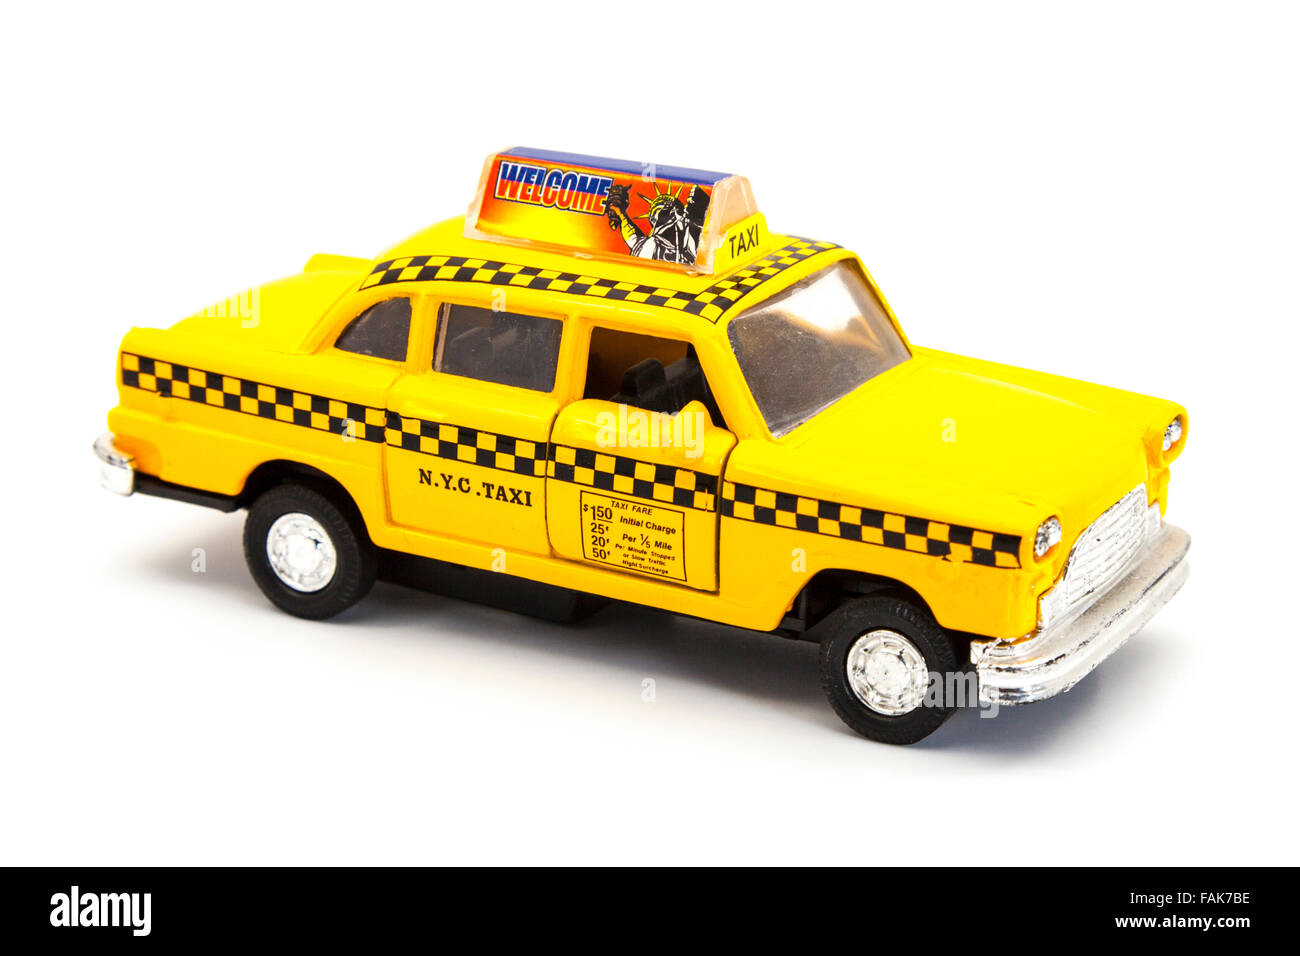 New York taxi yellow cab dinky toy Cutout cut out white background isolated copy space Stock Photo